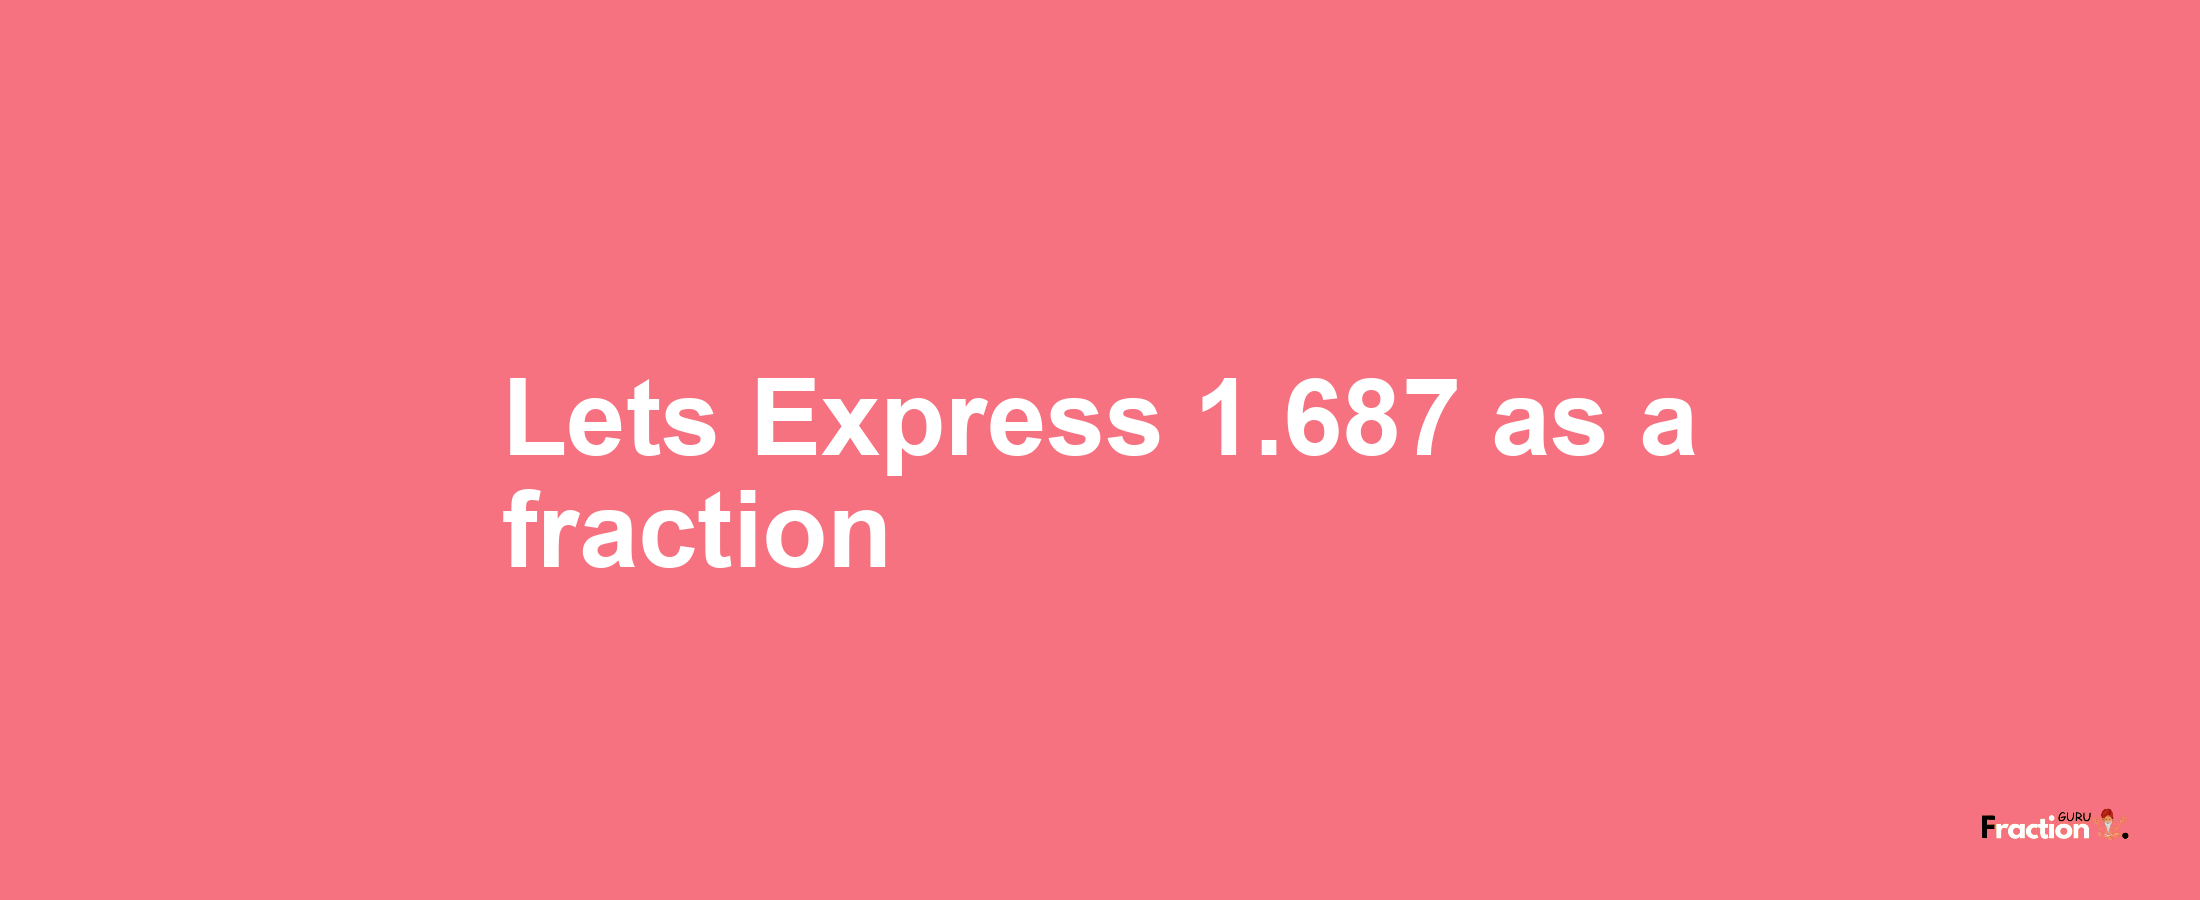 Lets Express 1.687 as afraction